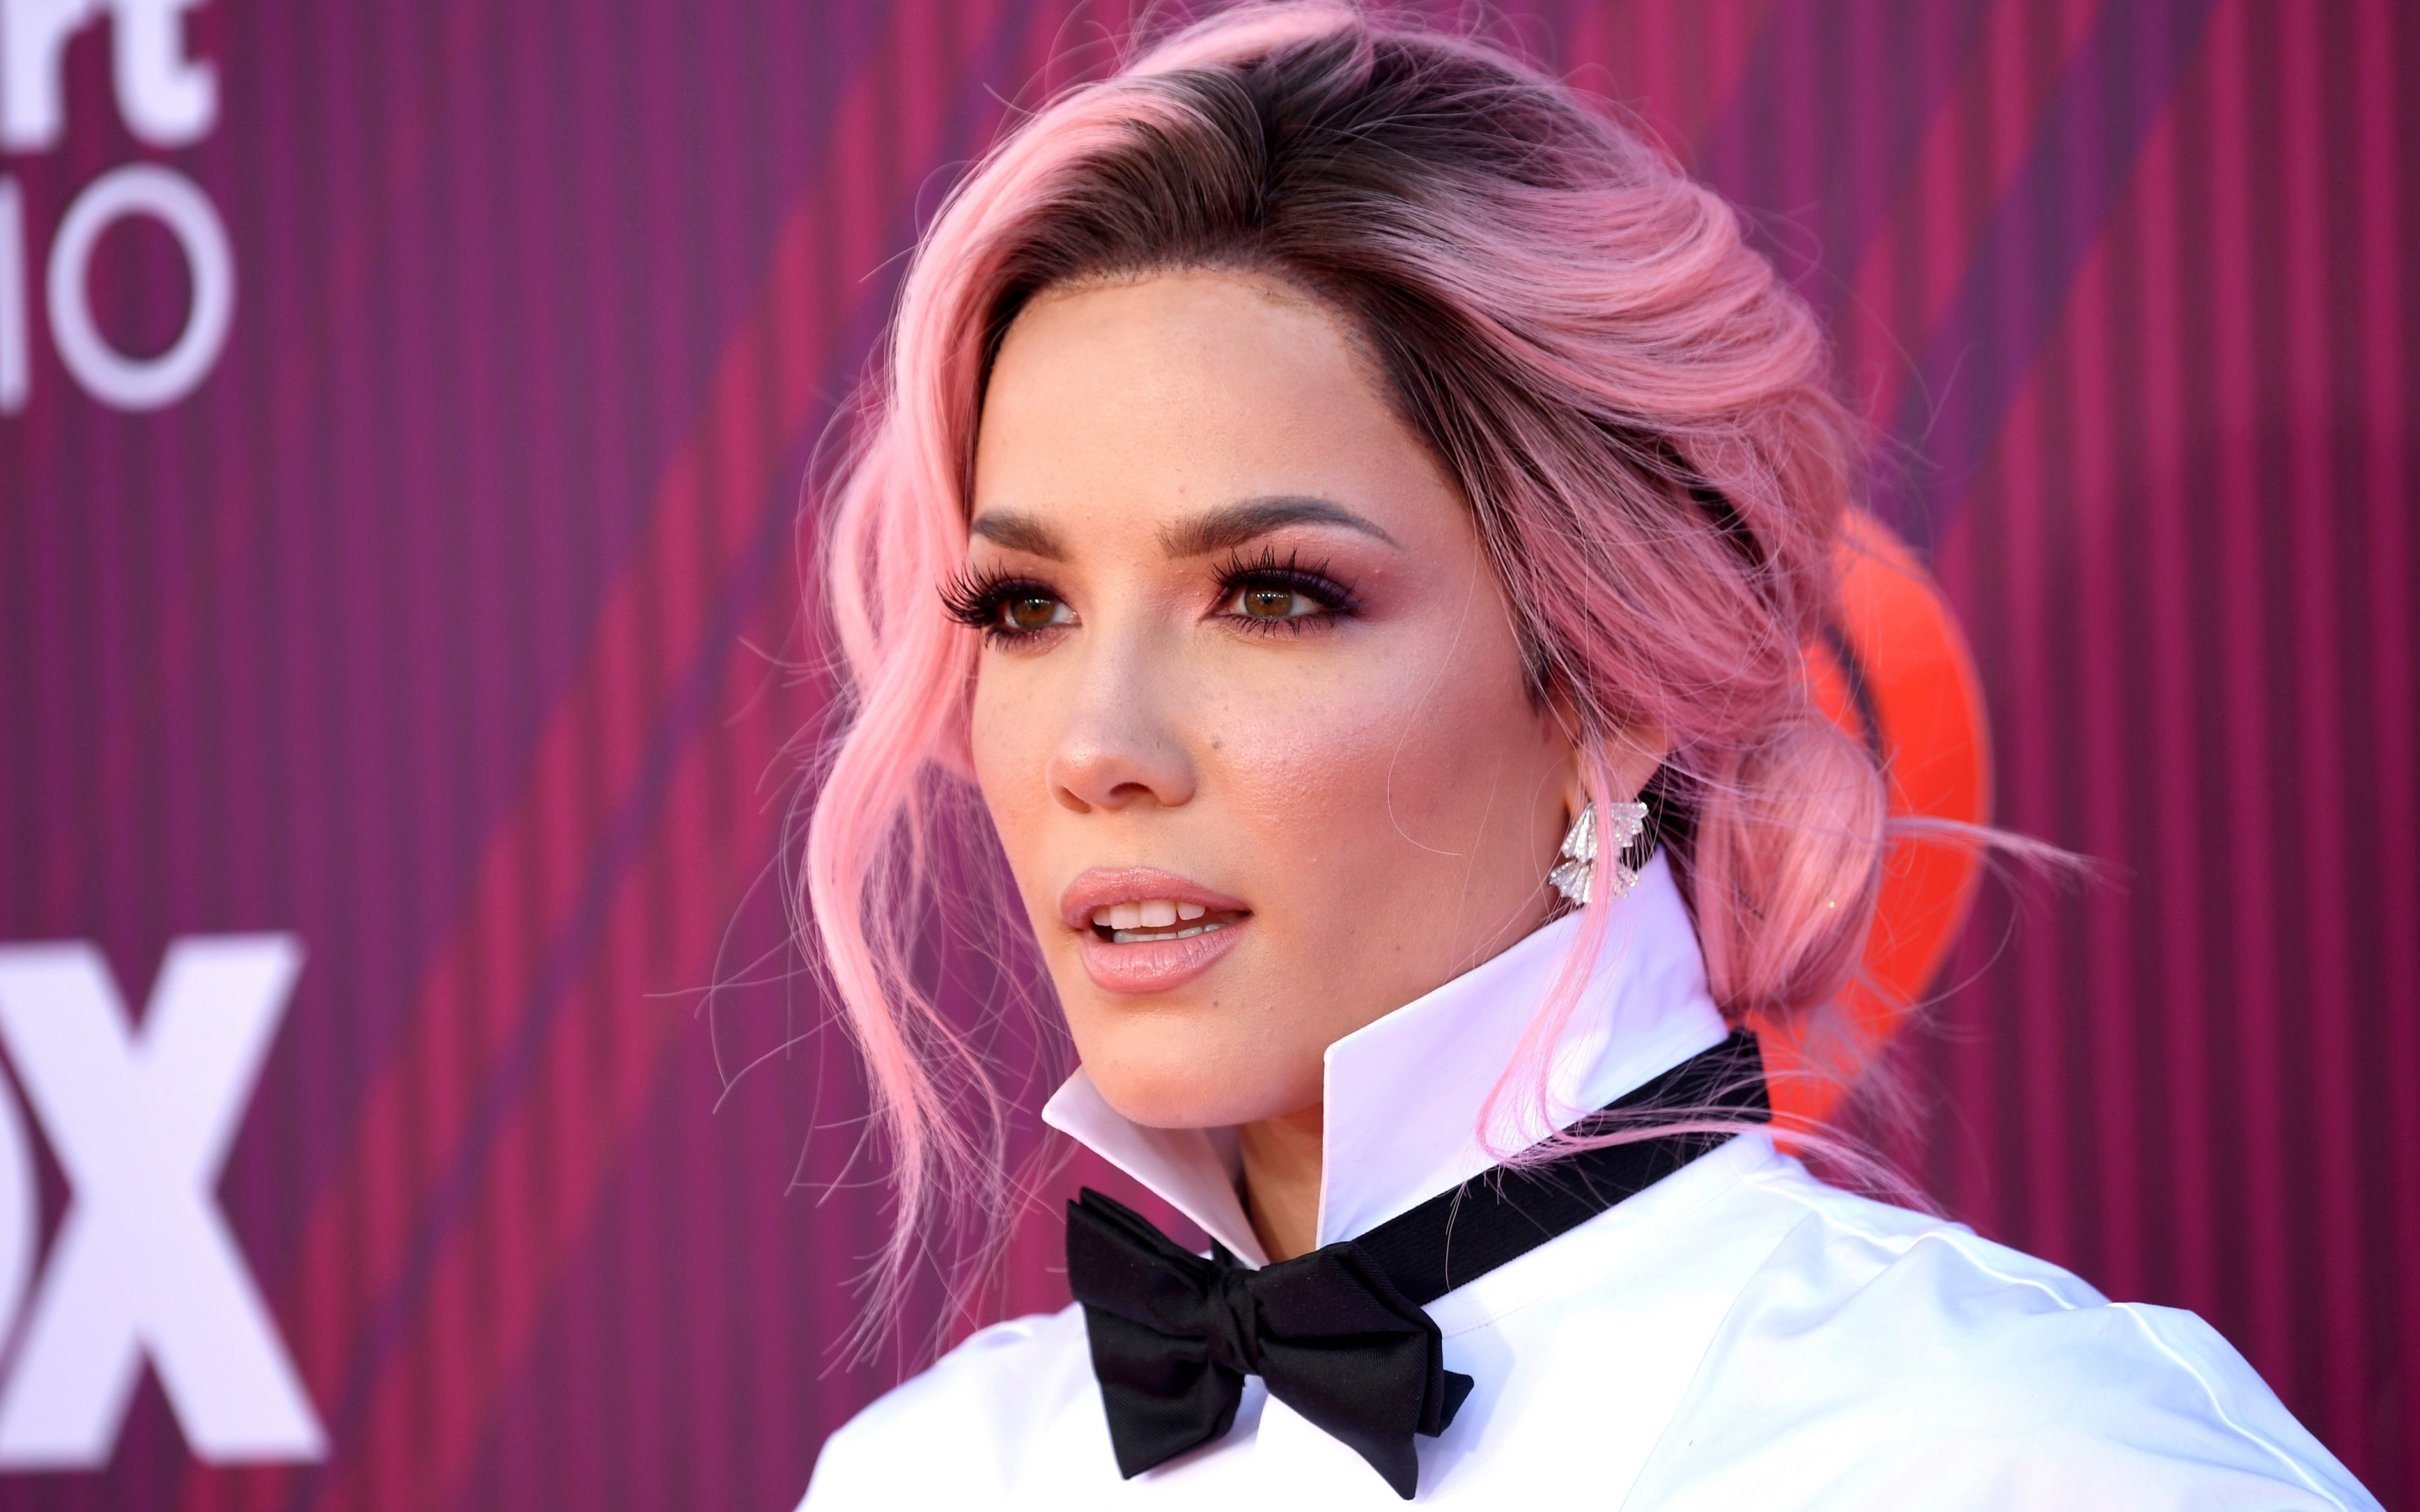 Gorgeous and beautiful singer, Halsey, 2880x1800 wallpaper